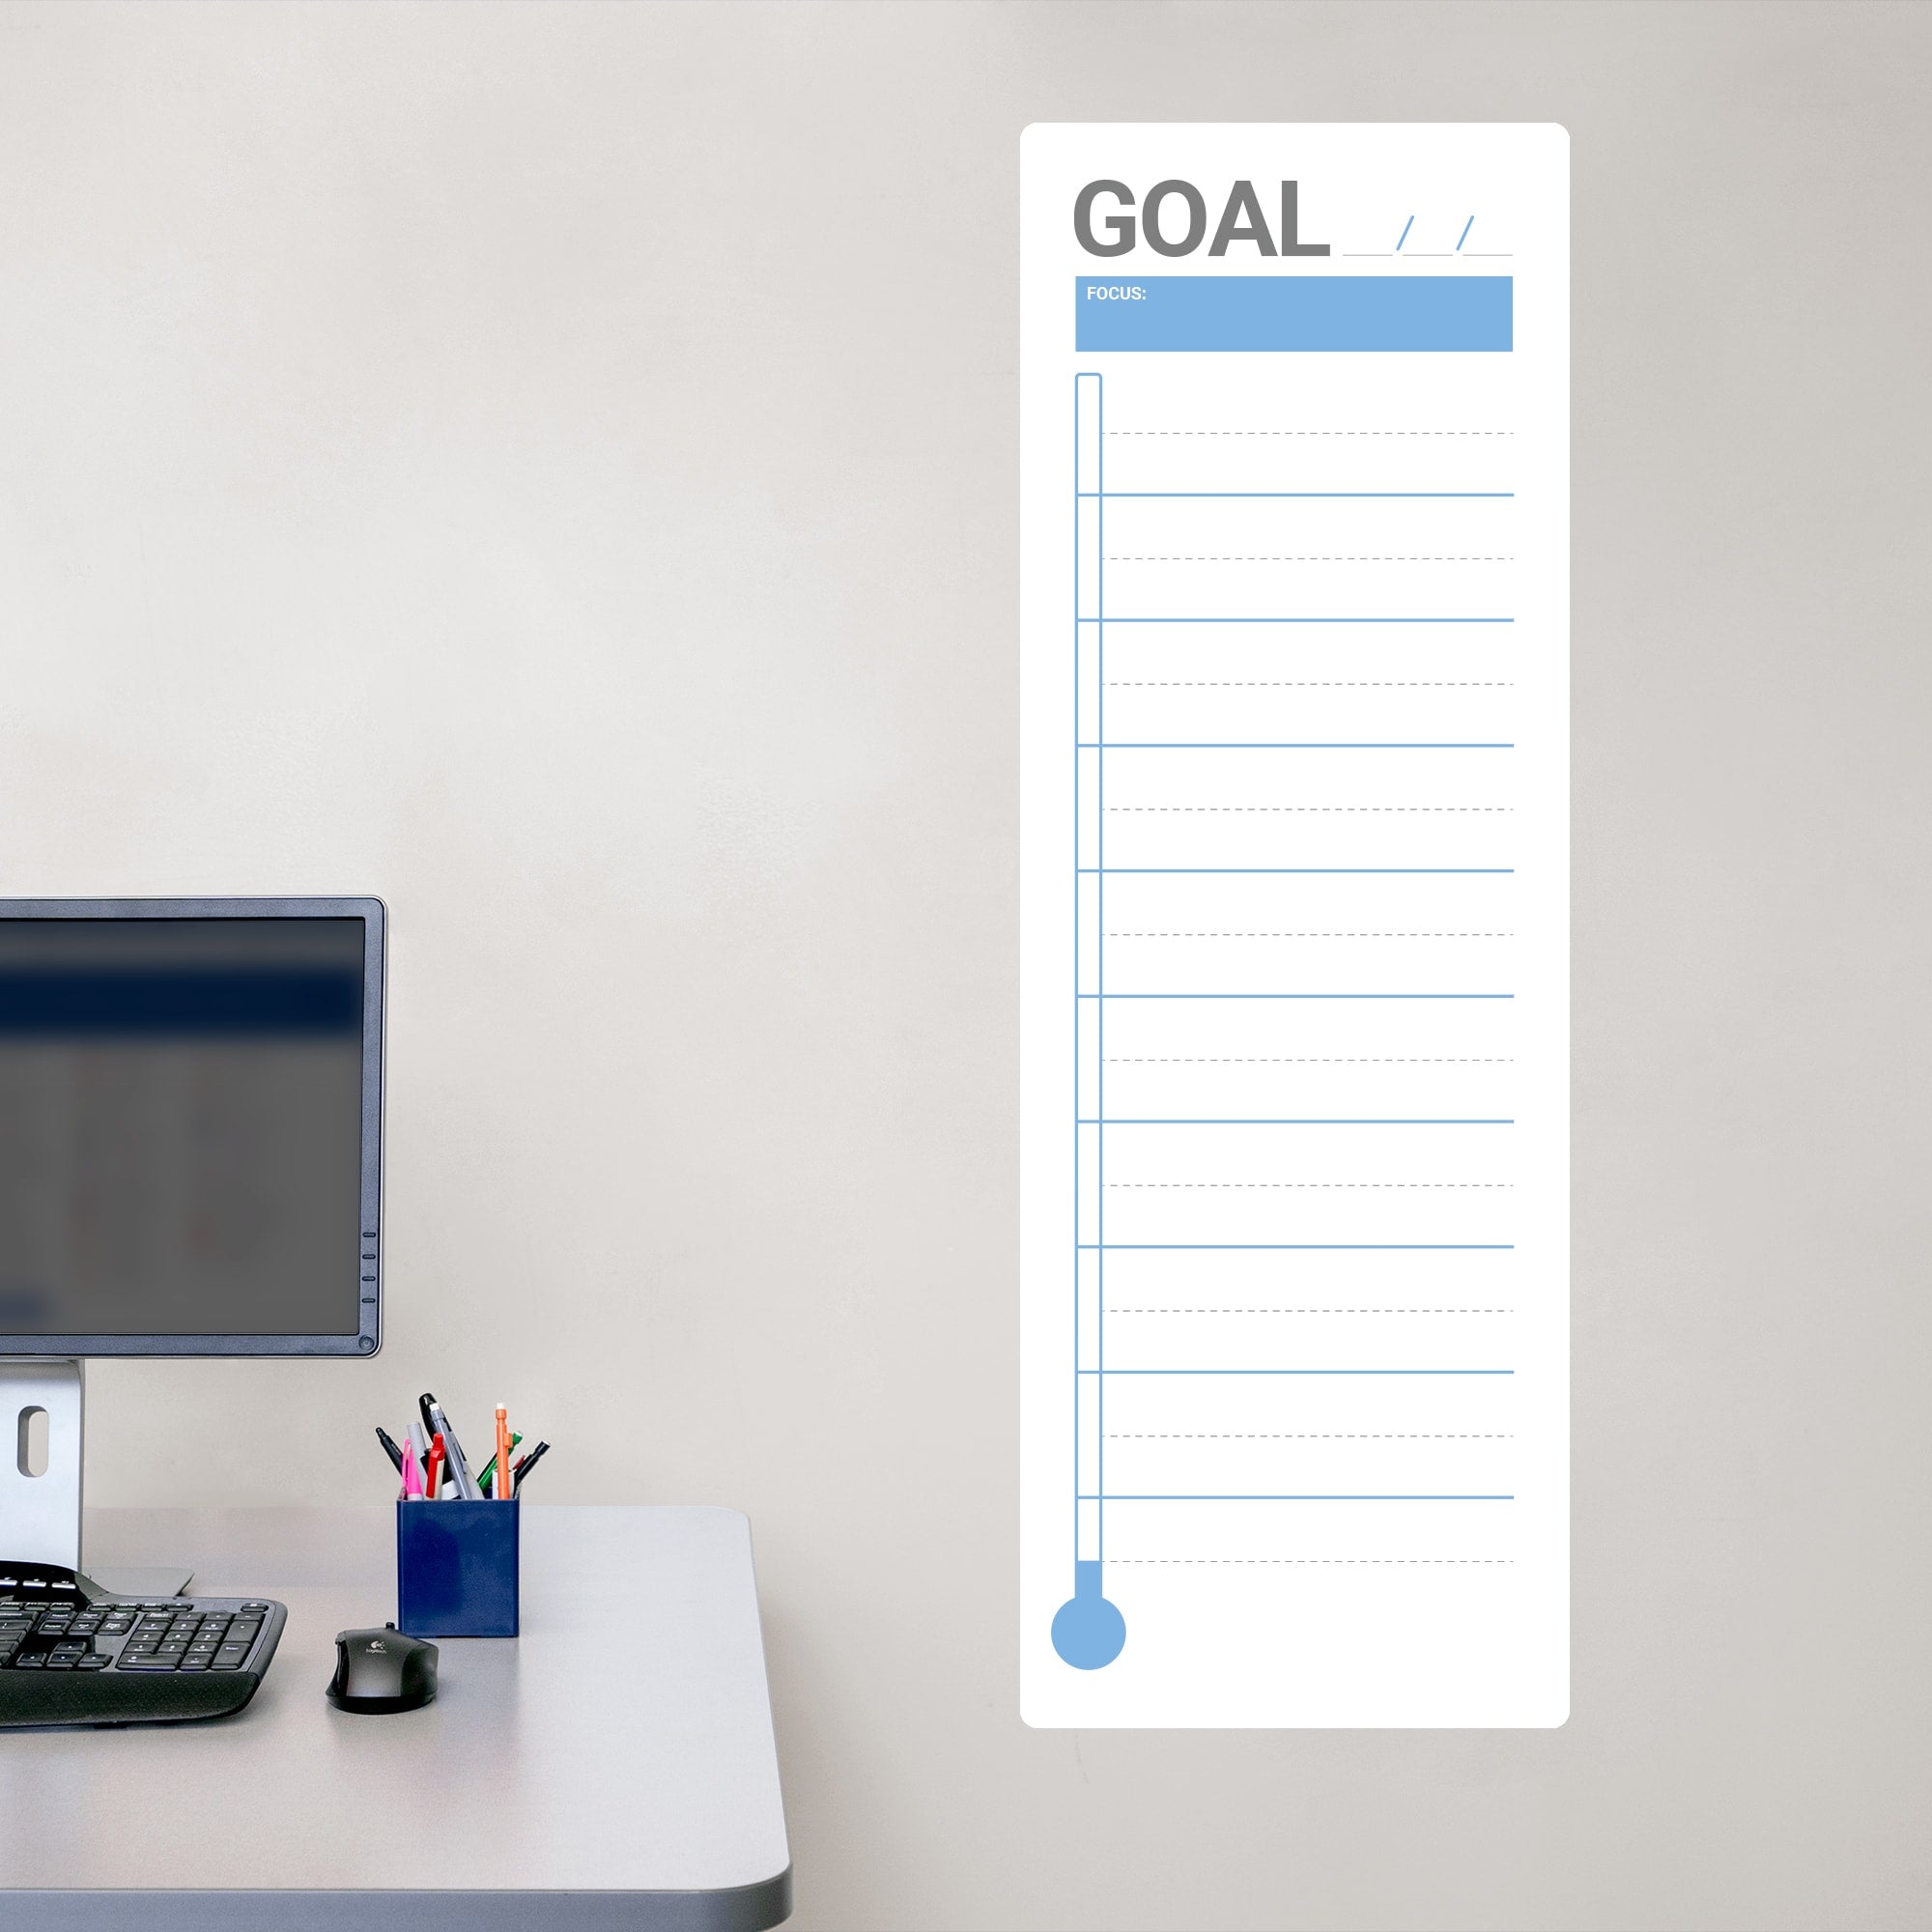 Goal Thermometer: Minamalist Design - Removable Dry Erase Vinyl Decal in Blue (42"W x 14"H) by Fathead